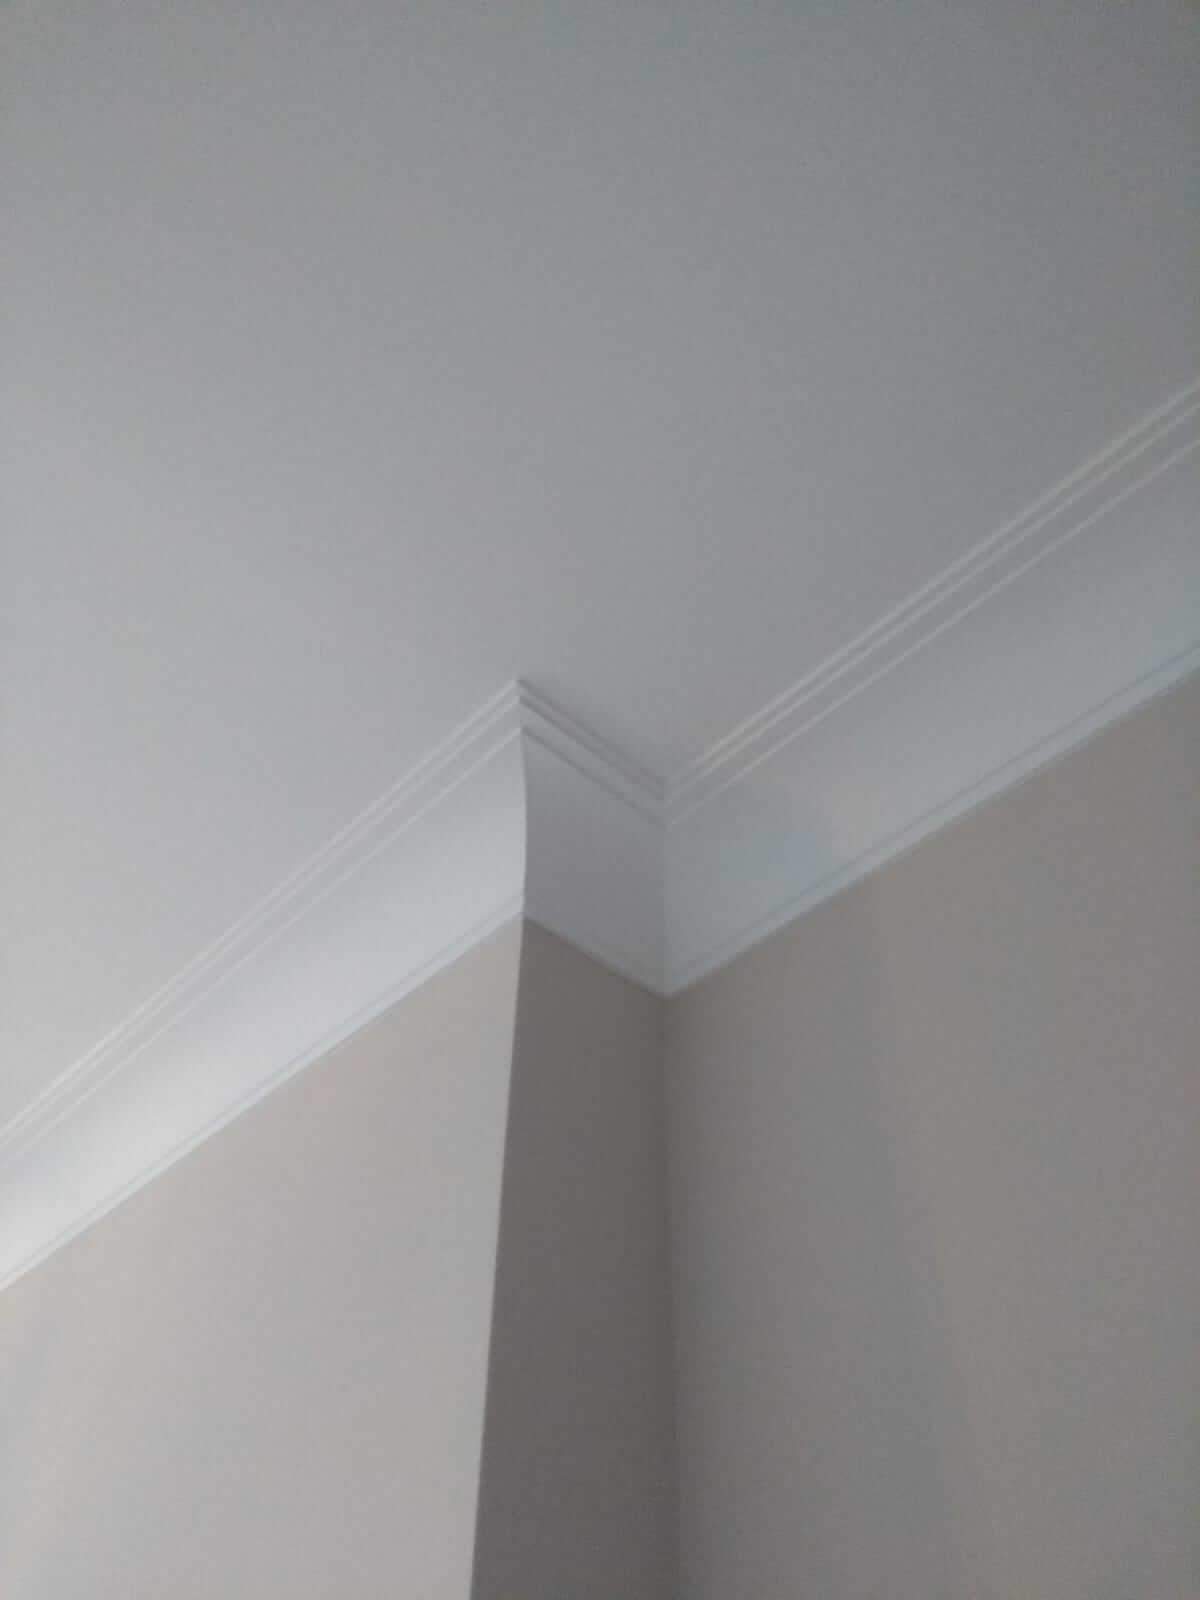 MD105 - Modern Coving installed 2